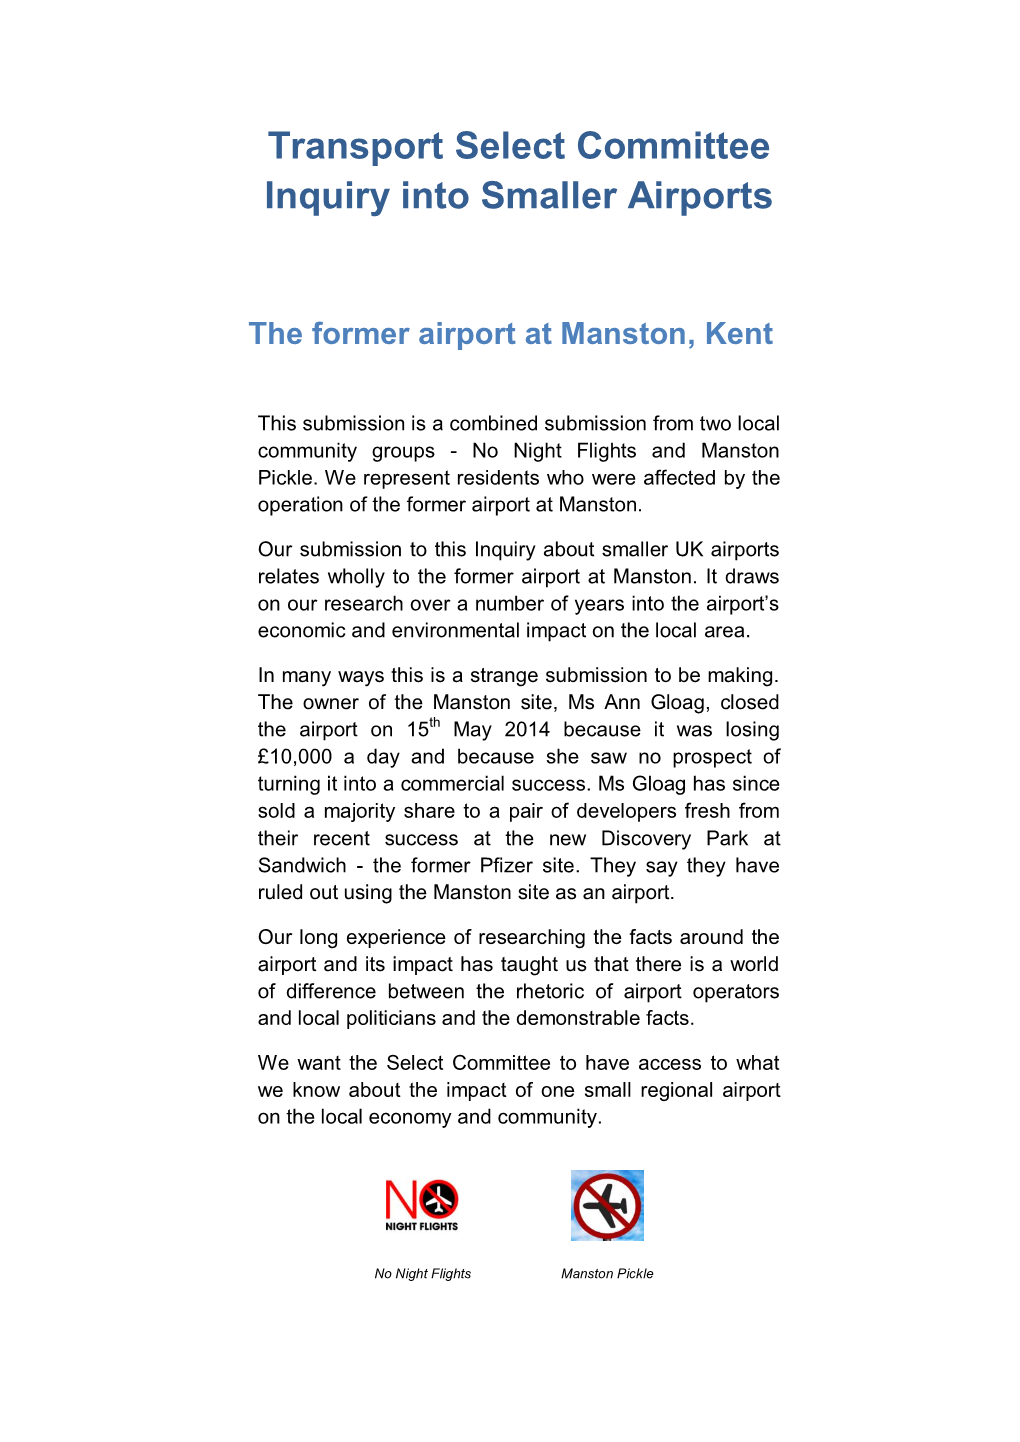 Transport Select Committee Inquiry Into Smaller Airports